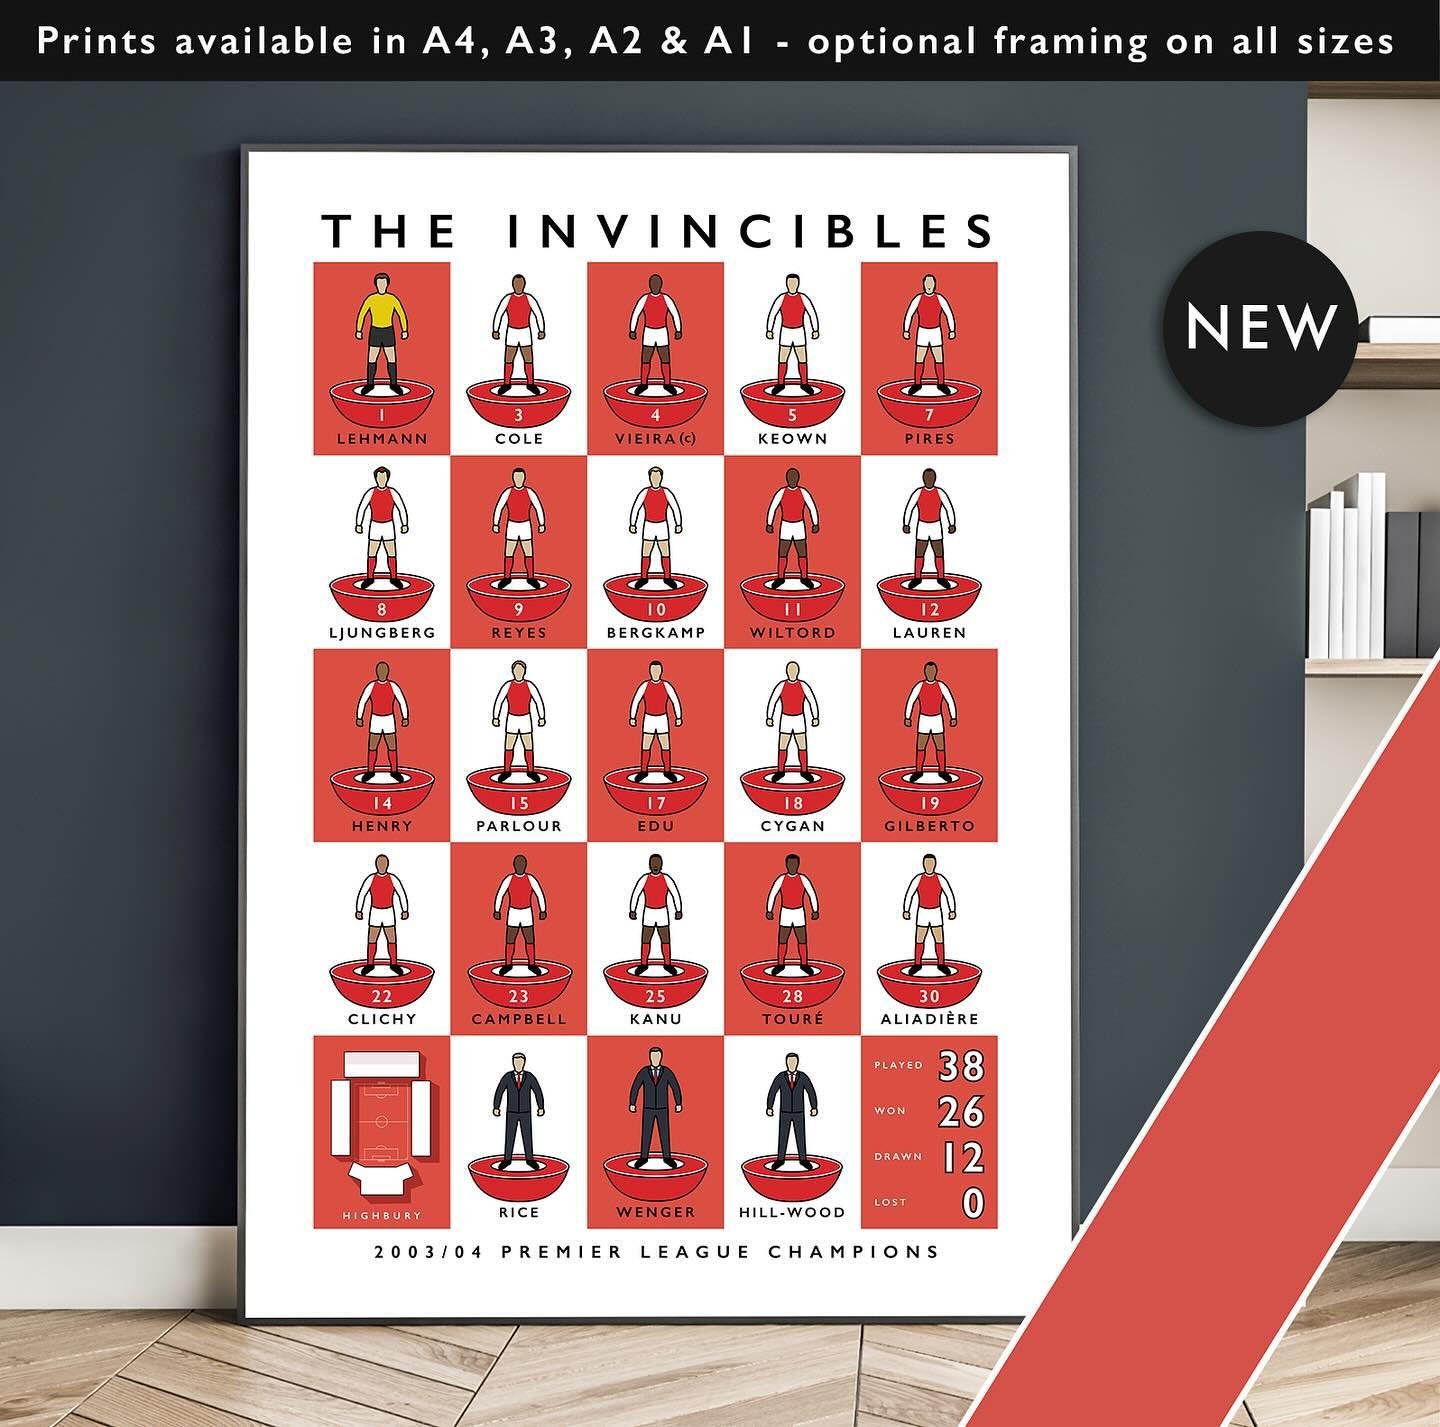 NEW: Arsenal The Invincibles 

Prints available in A4, A3, A2 &amp; A1 with optional framing 

Get 10% off until midnight with the discount code
THE-INVINCIBLES 

Shop now: matthewjiwood.com/subbuteo-xis/a&hellip;

#Arsenal #Gunners #AFC #Invincibles